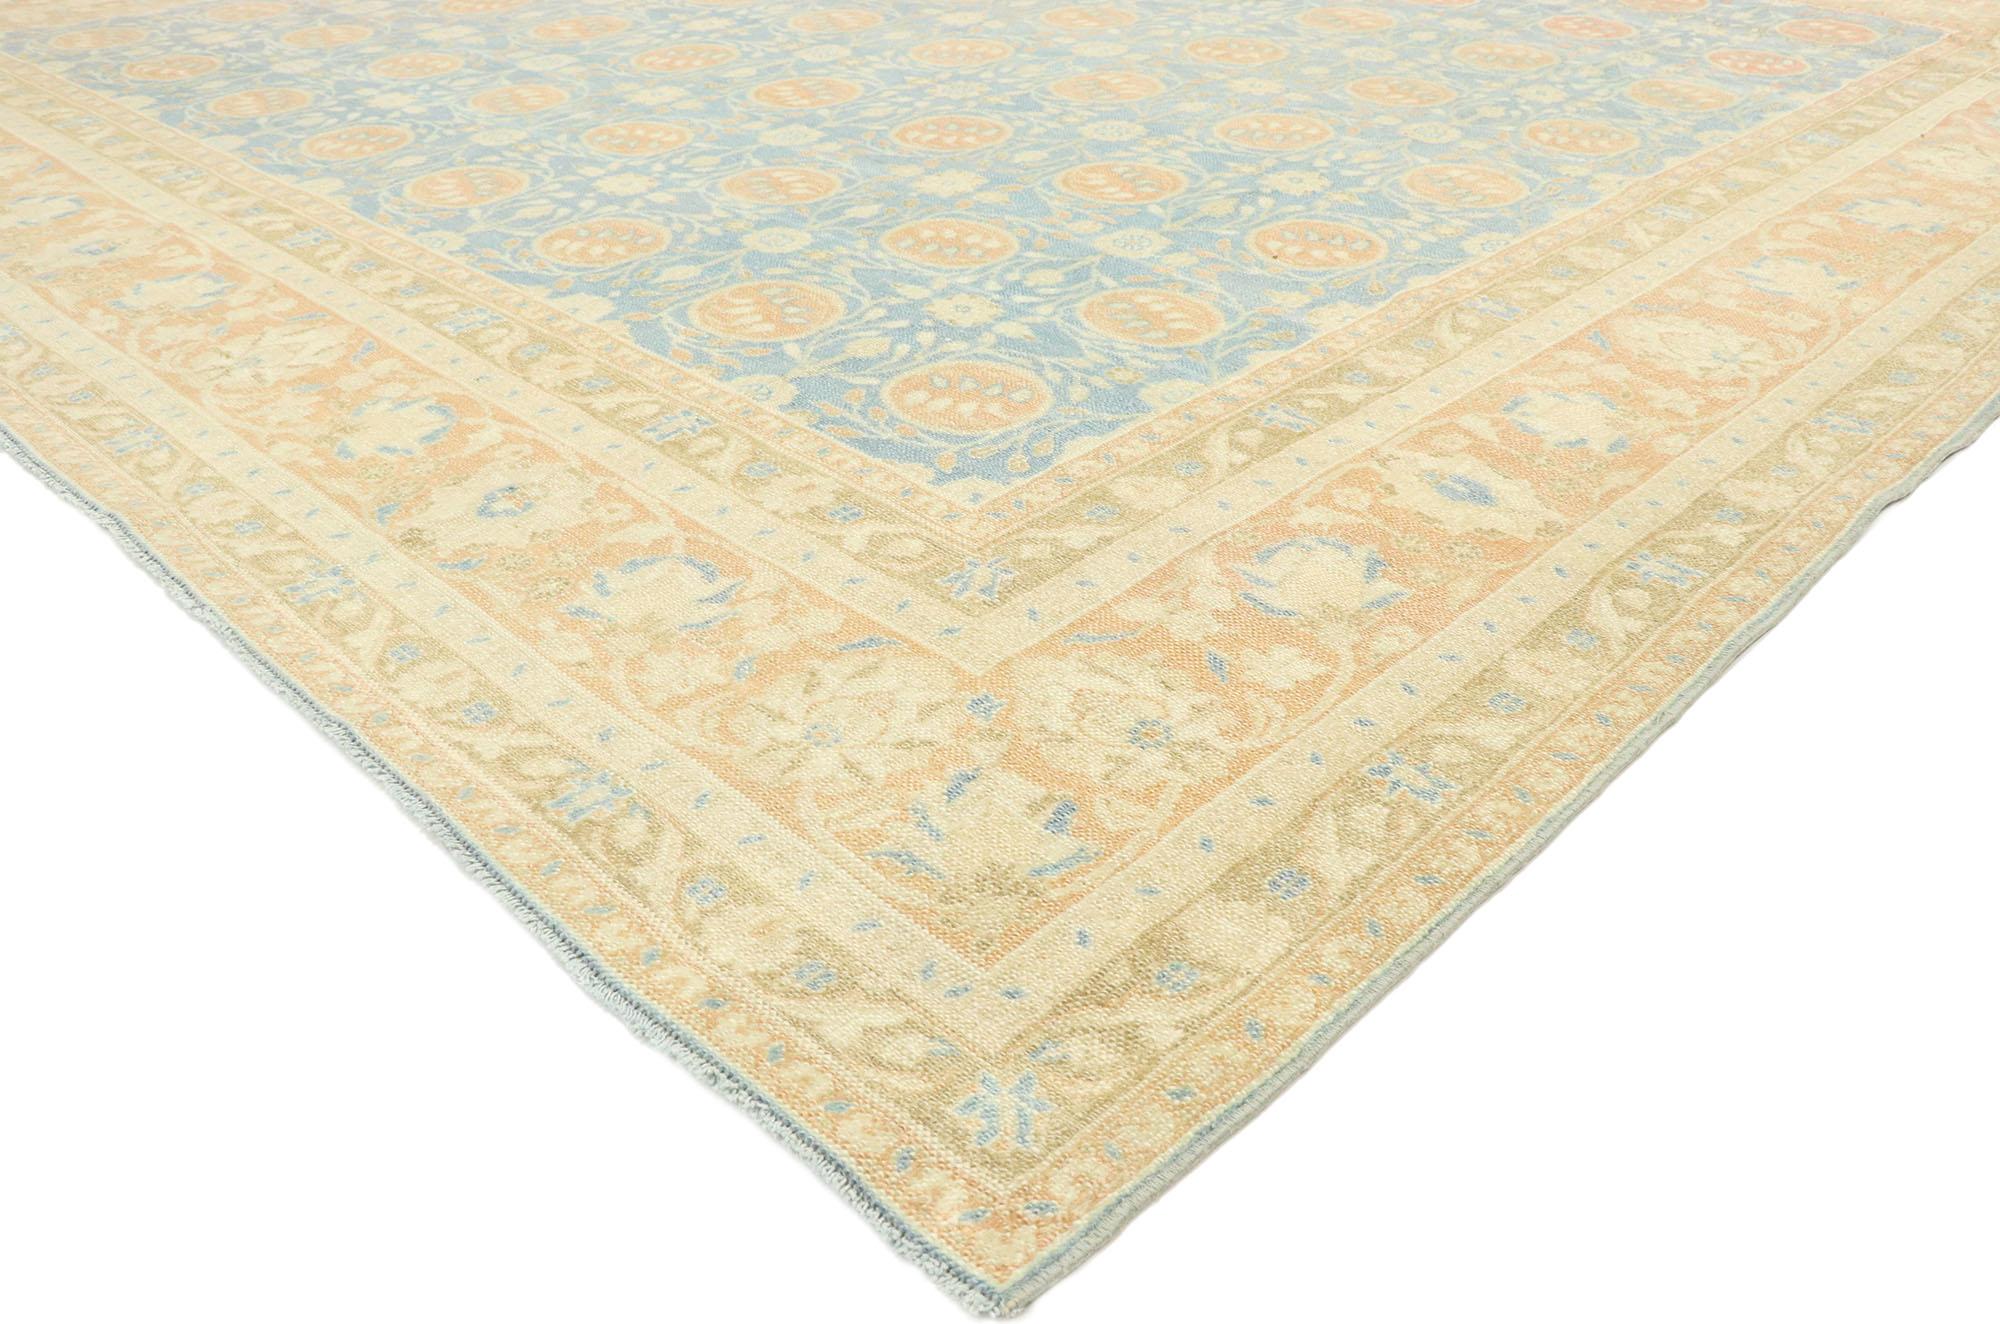 53034 distressed vintage Portuguese Khotan style rug with Italian Mediterranean style. Melding sumptuous elegance and weathered beauty, this hand knotted wool distressed vintage Portuguese Khotan style rug is poised to impress. The lovingly